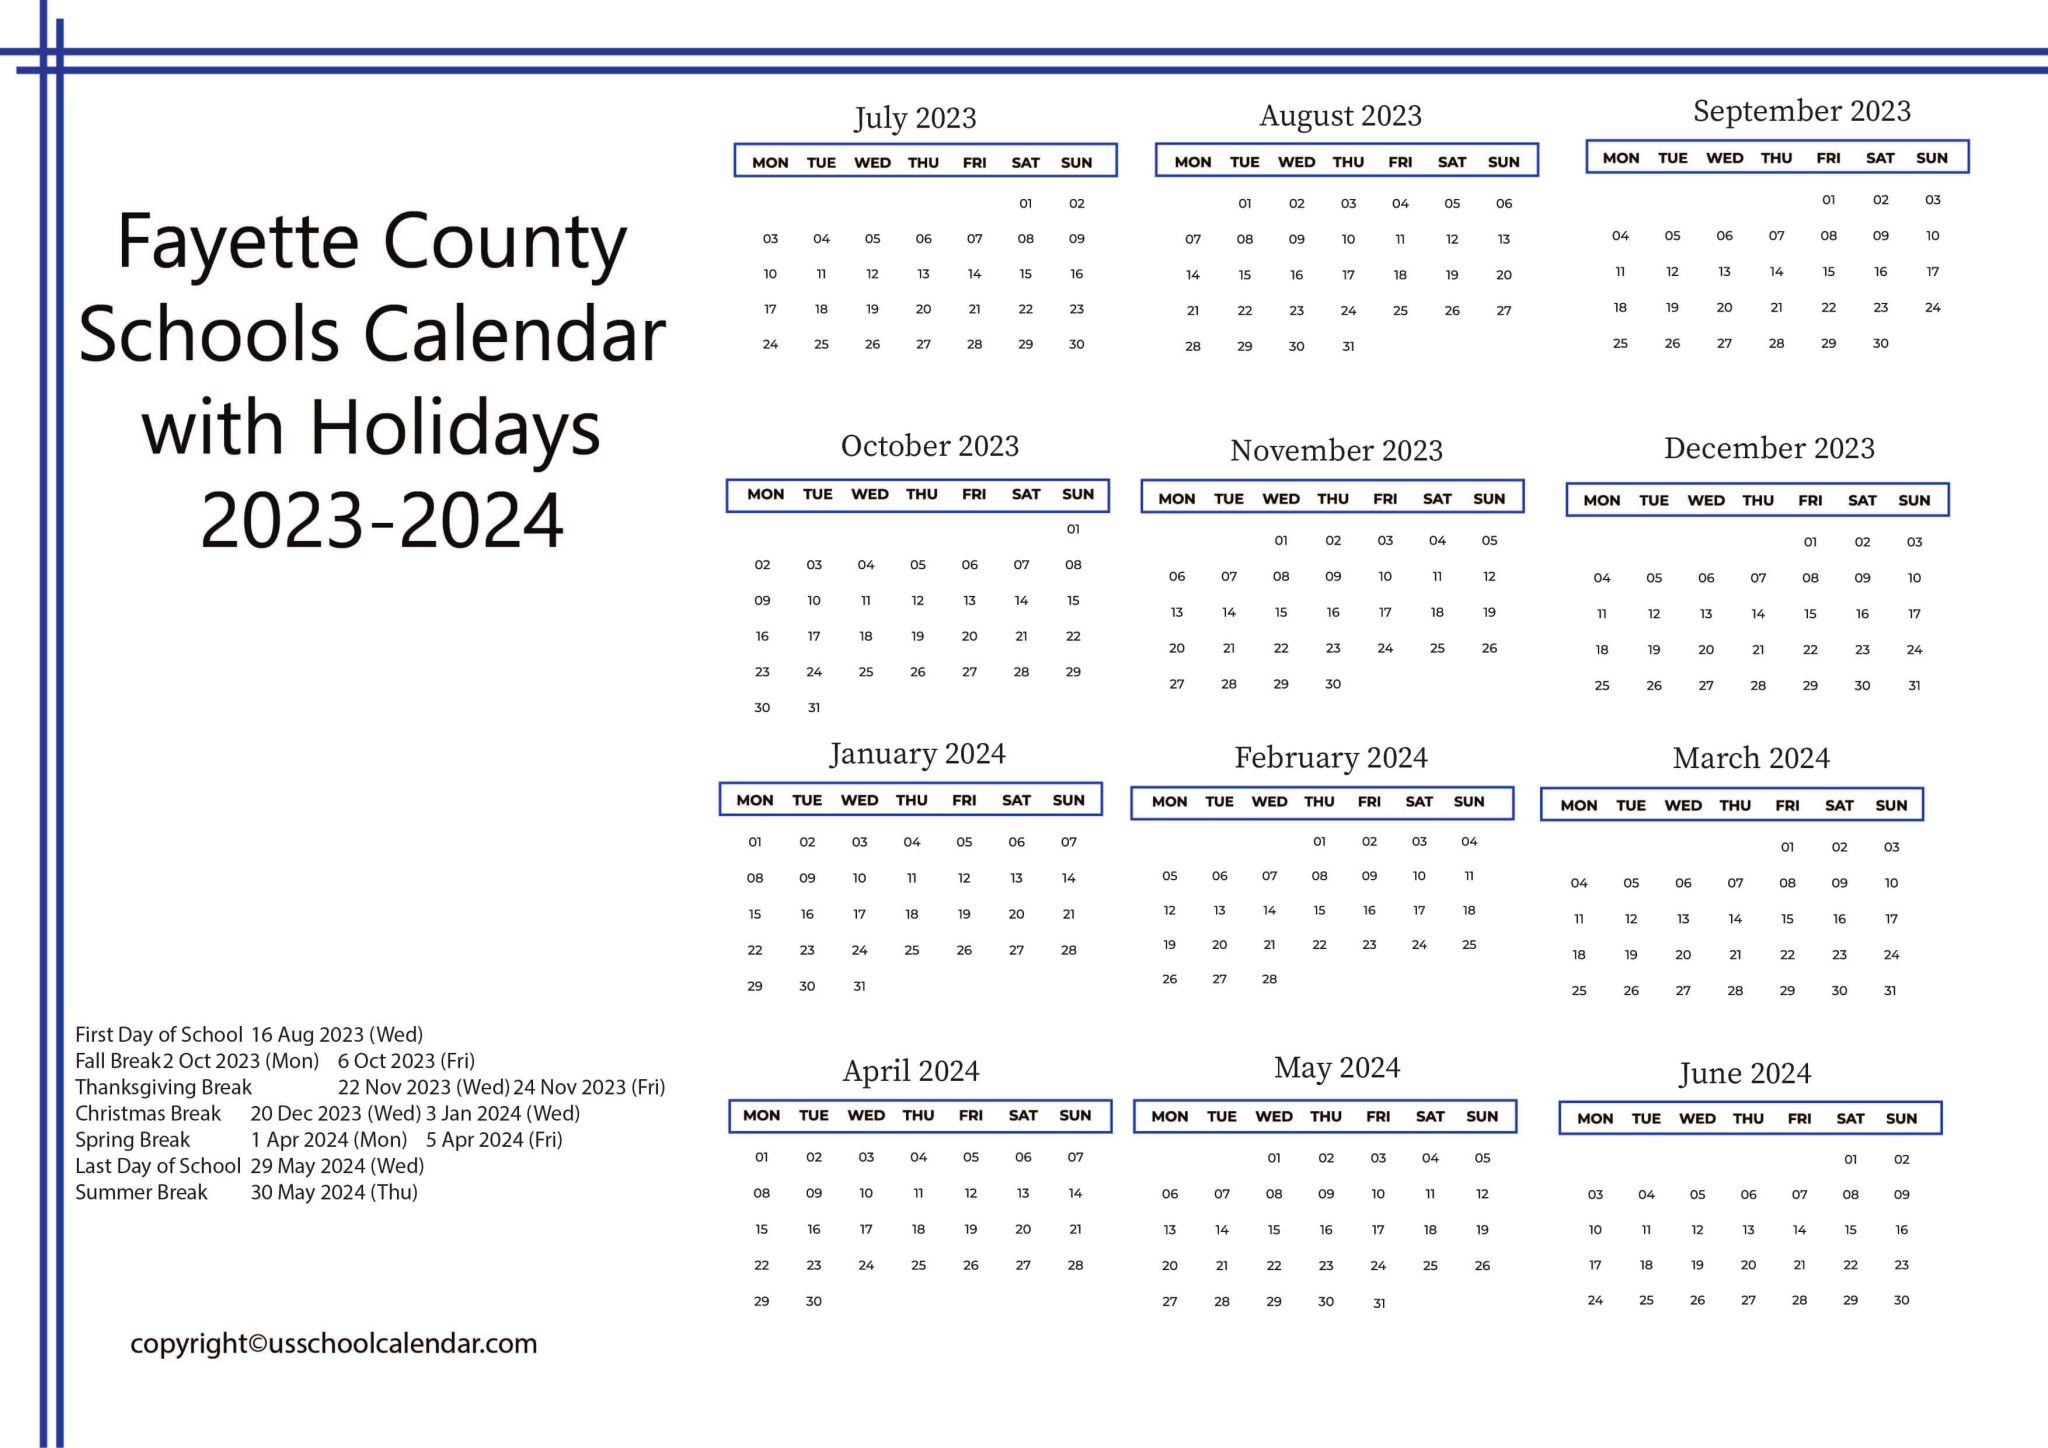 Fayette County Schools Calendar with Holidays 20232024